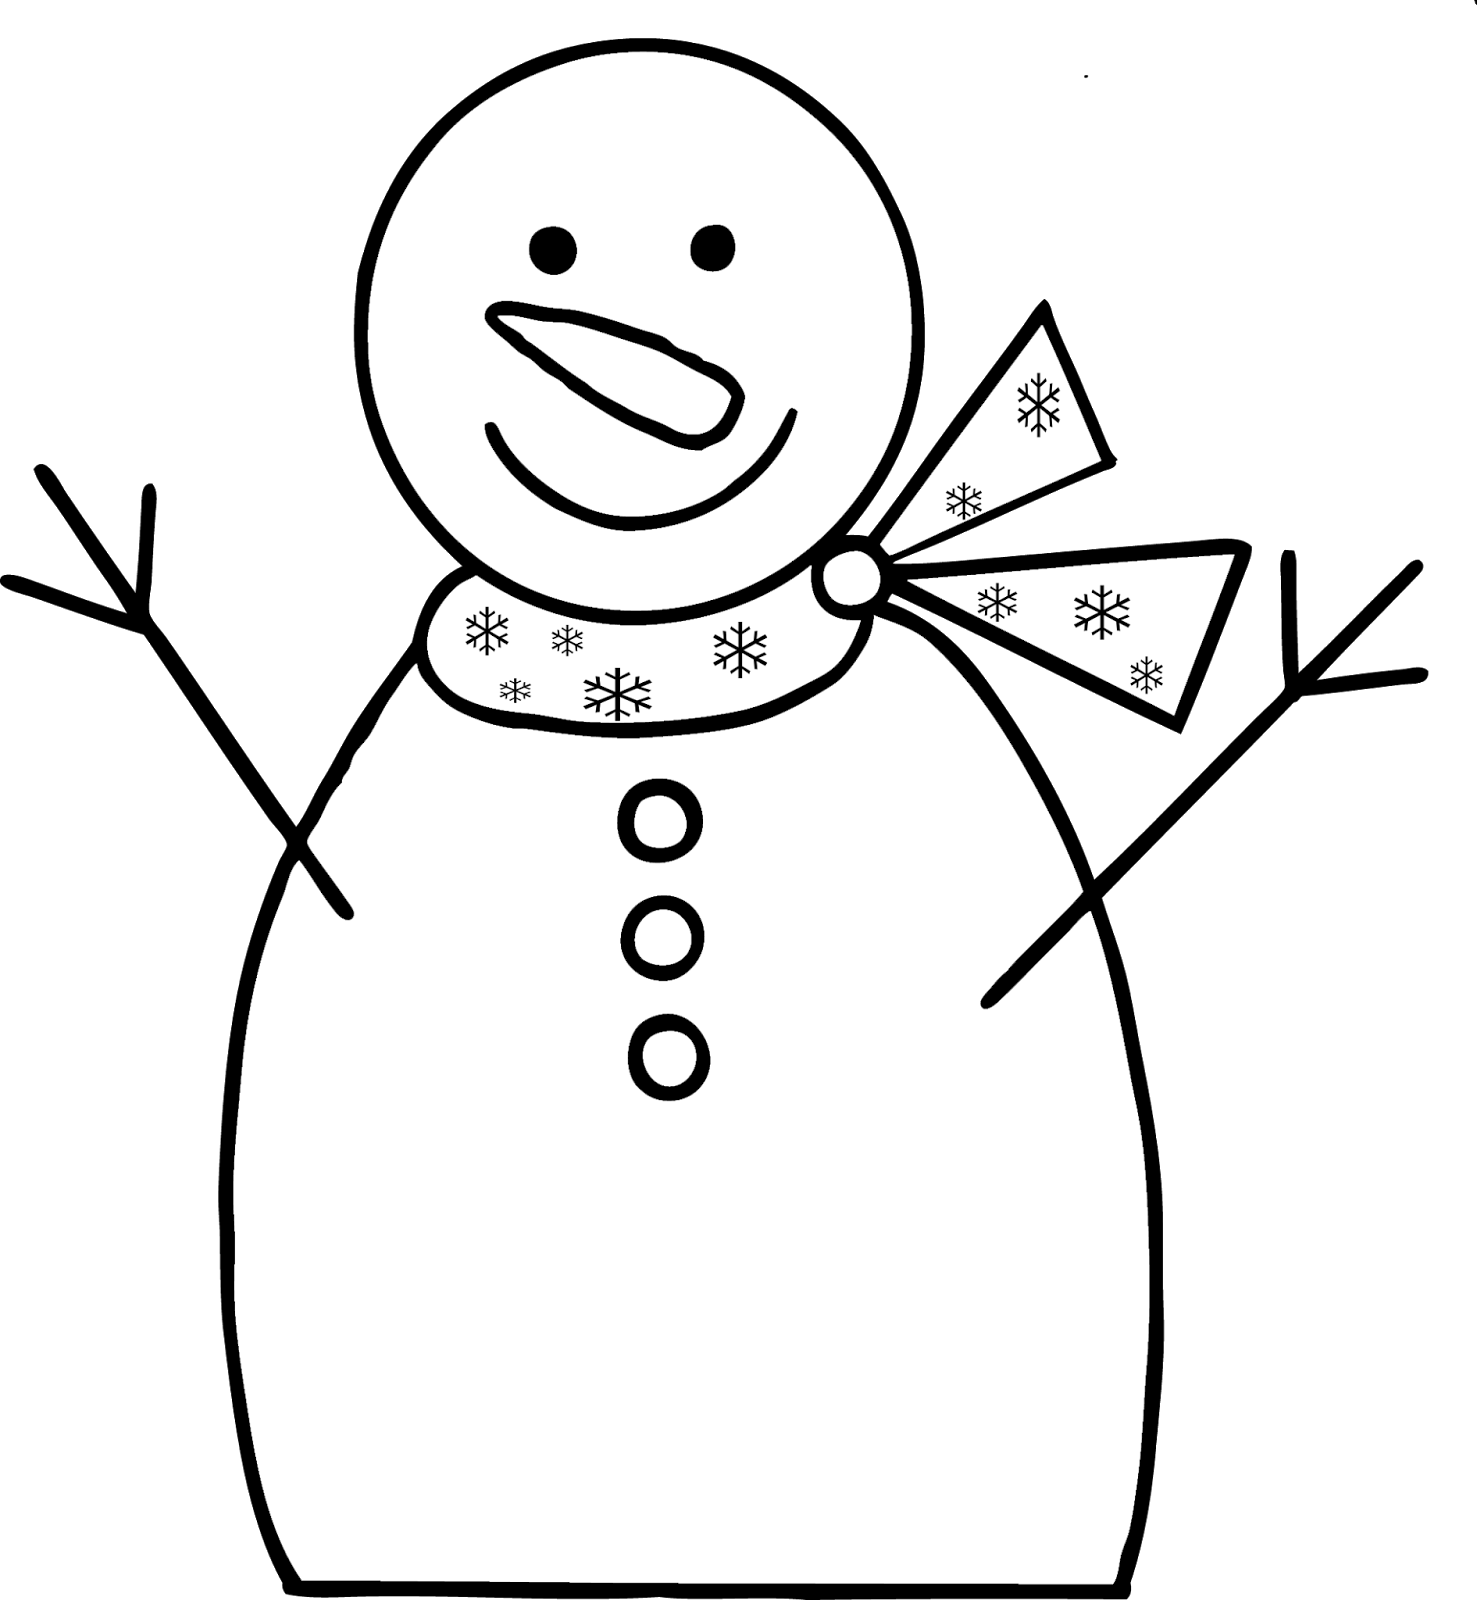 Funny snowman as picture for clipart free image download